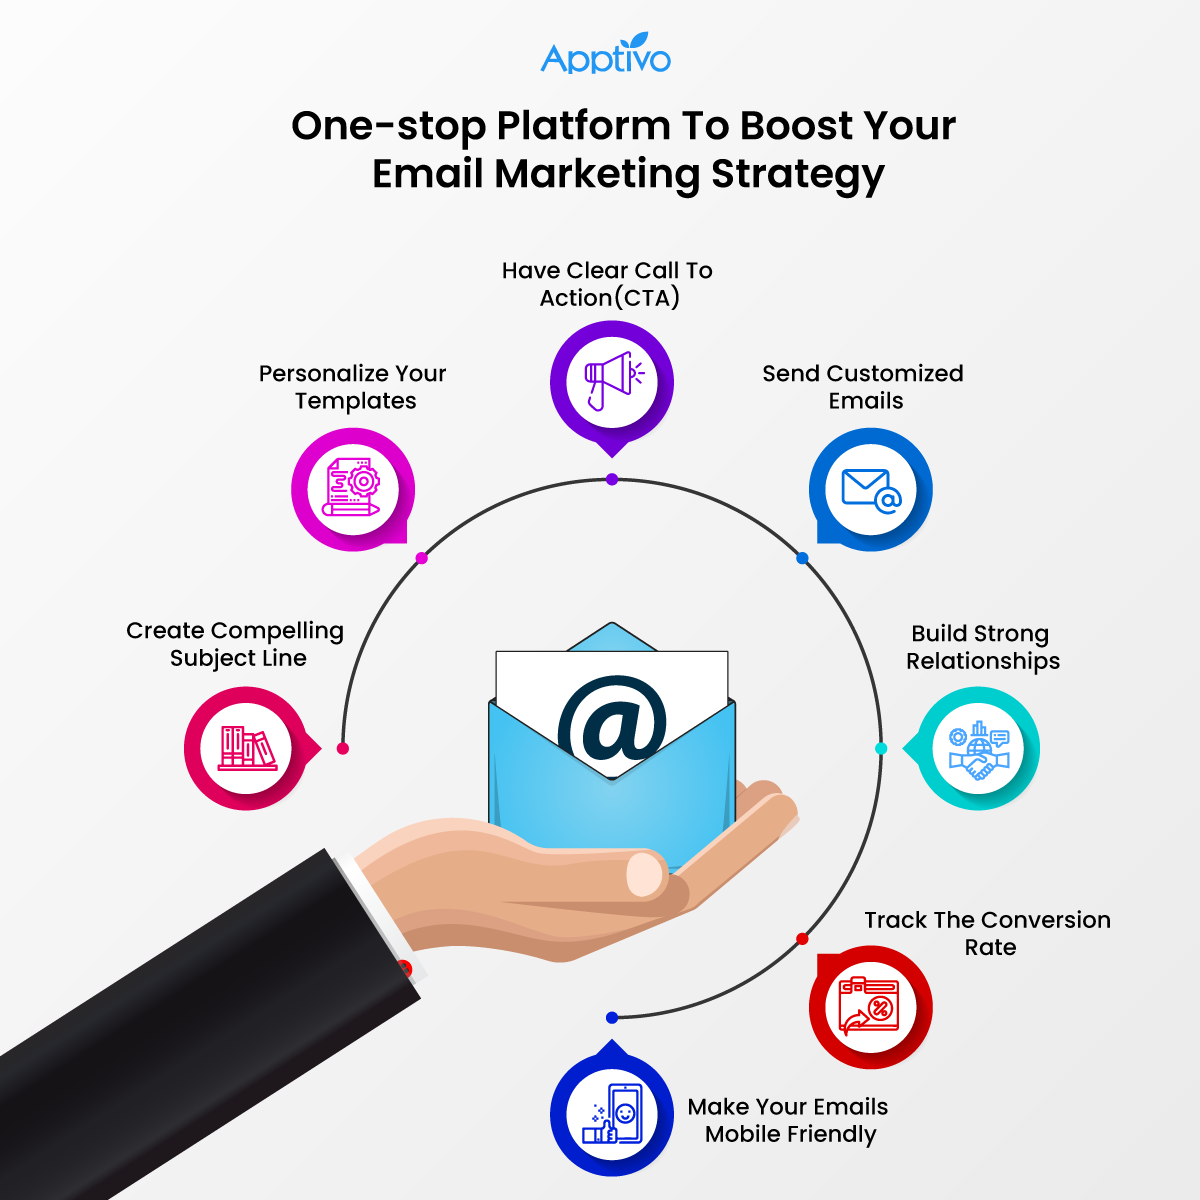 Online Notepad - See This Report about 5 questions about email marketing strategy- Emailmanager
